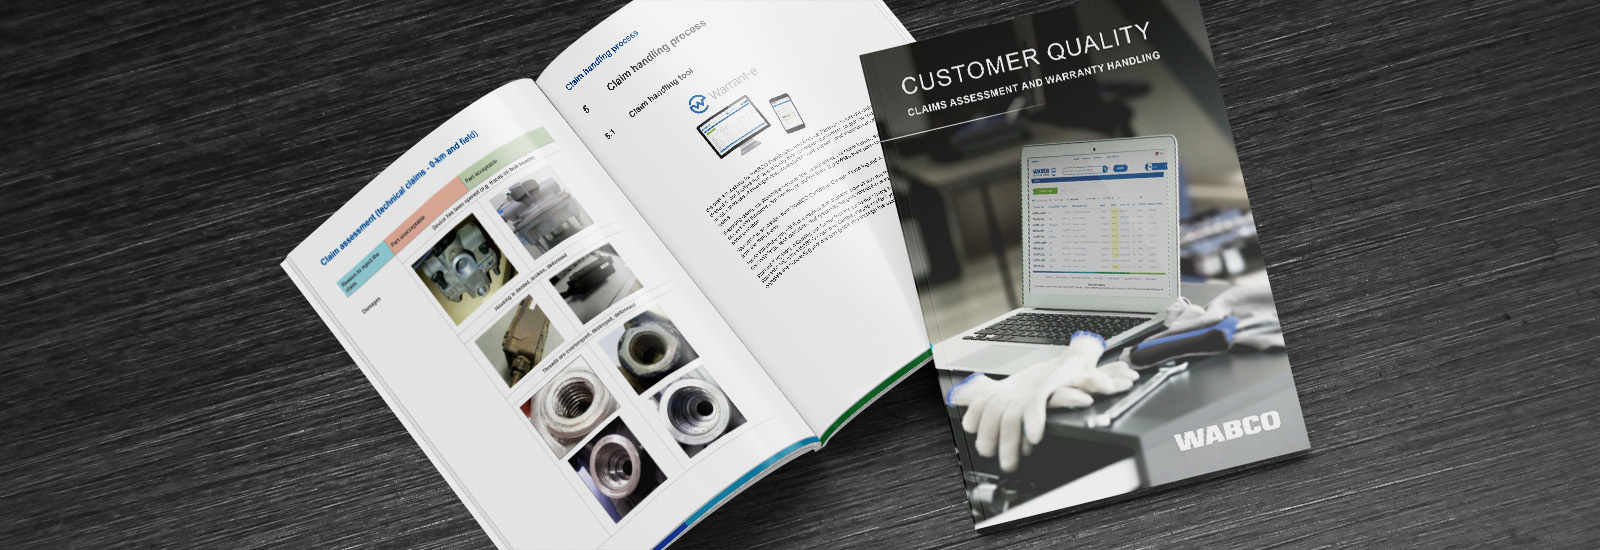 New Customer Quality and Claims Handling Booklet